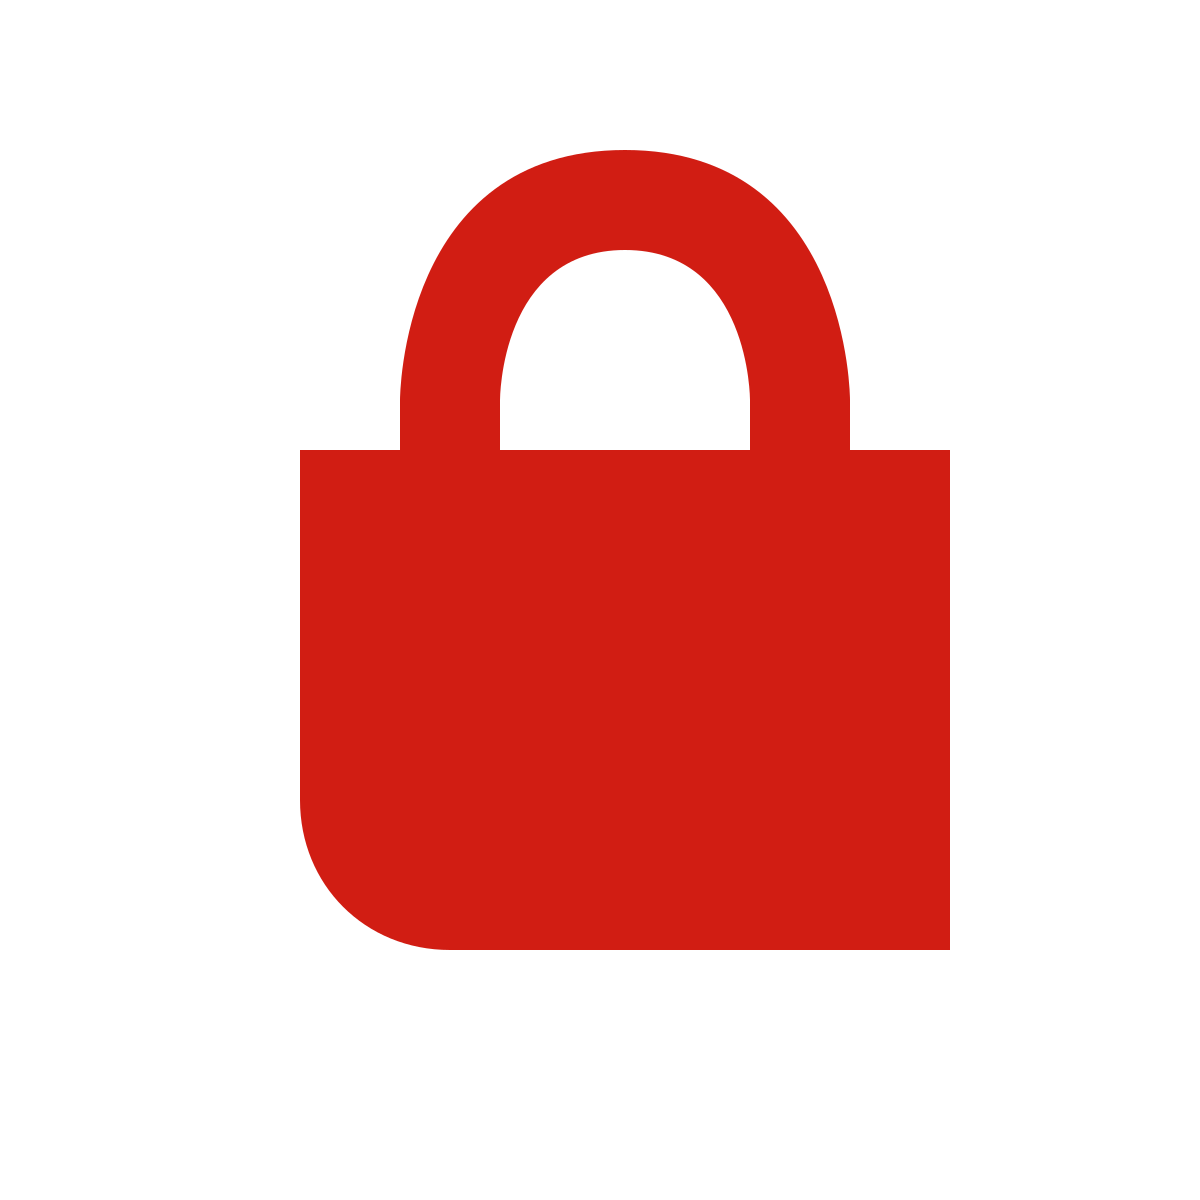 A lock icon with a red X over it.